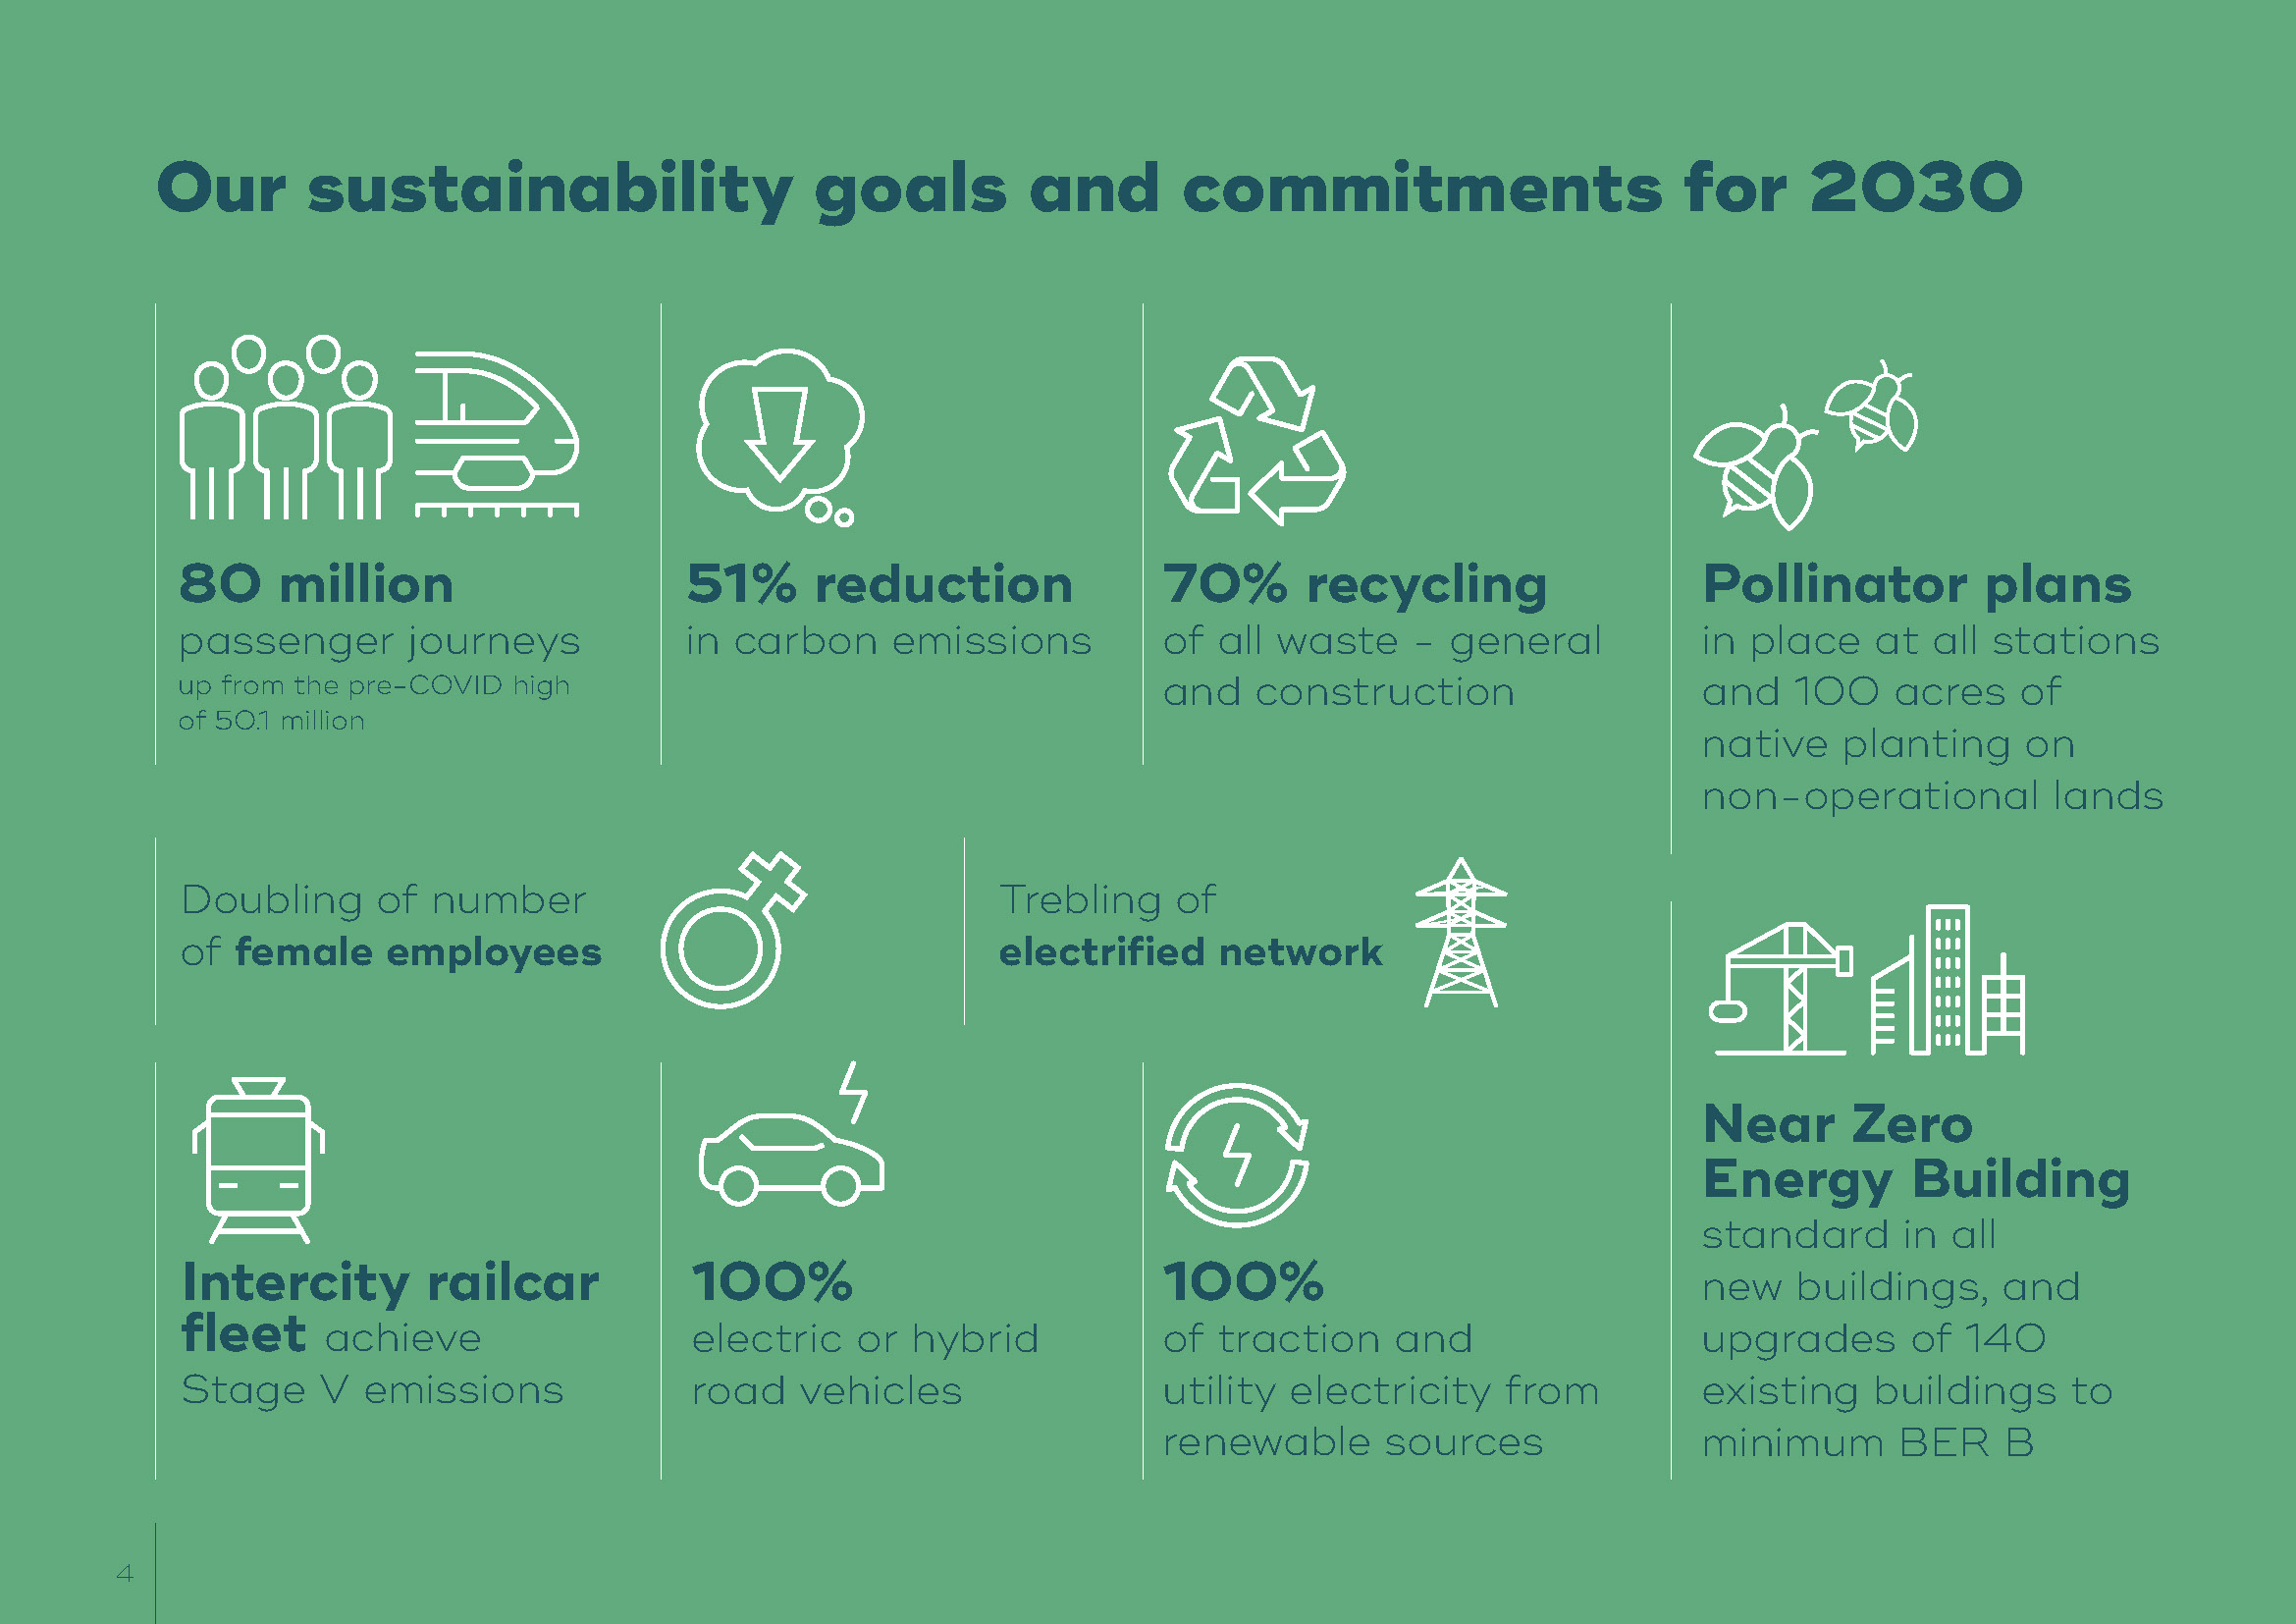 Our sustainability goals and commitments for 2030